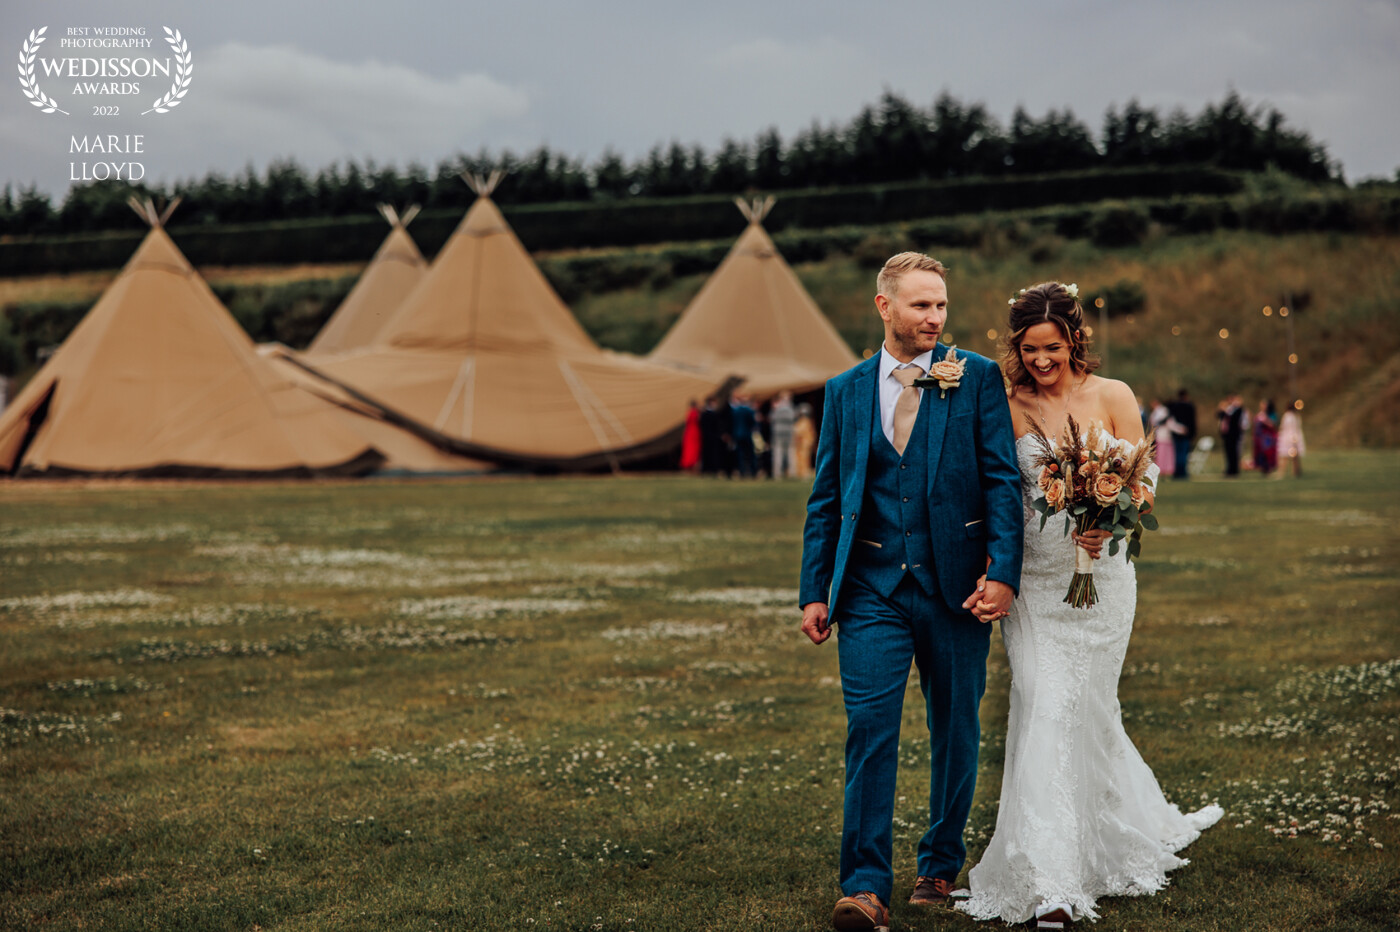 Bride and Groom taking a stroll in the gorgeous Cheshire countryside with their Tipi reception venue as a backdrop. The colours all work together so well and I love the simplicity of the photograph.